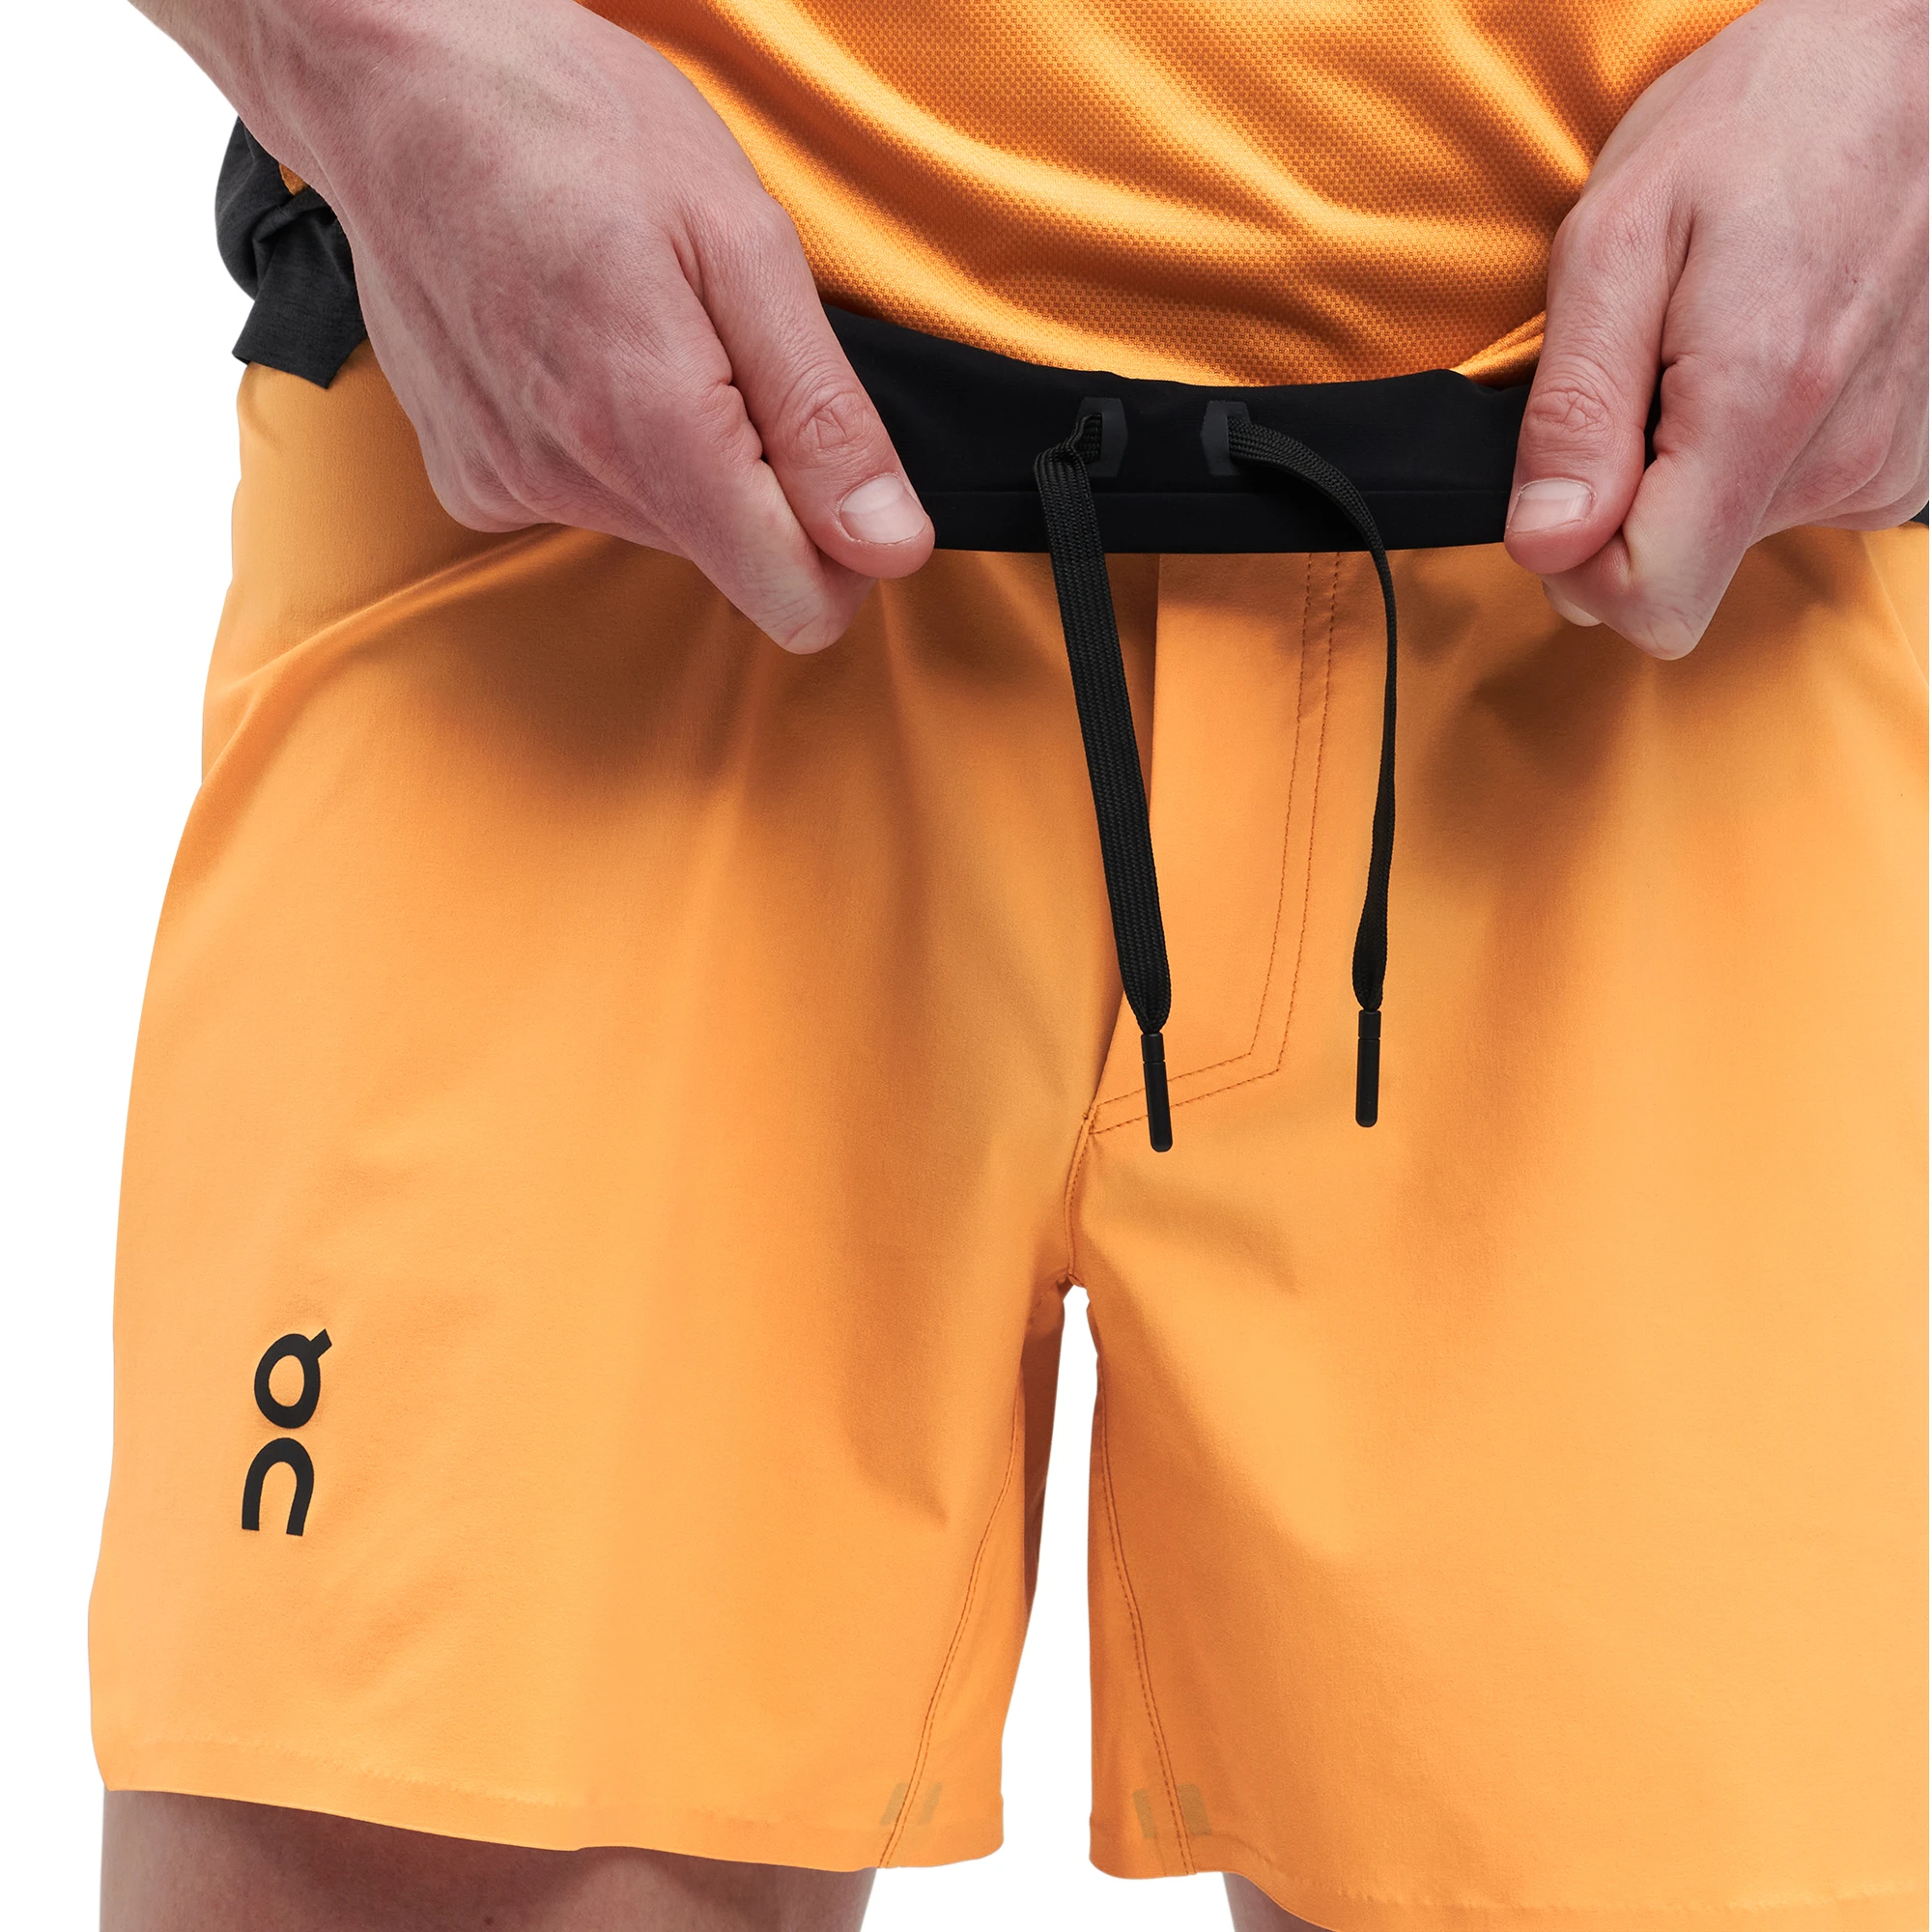 FEDTOSING Running Workout Shorts 5 Inches Quick Dry Lightweight